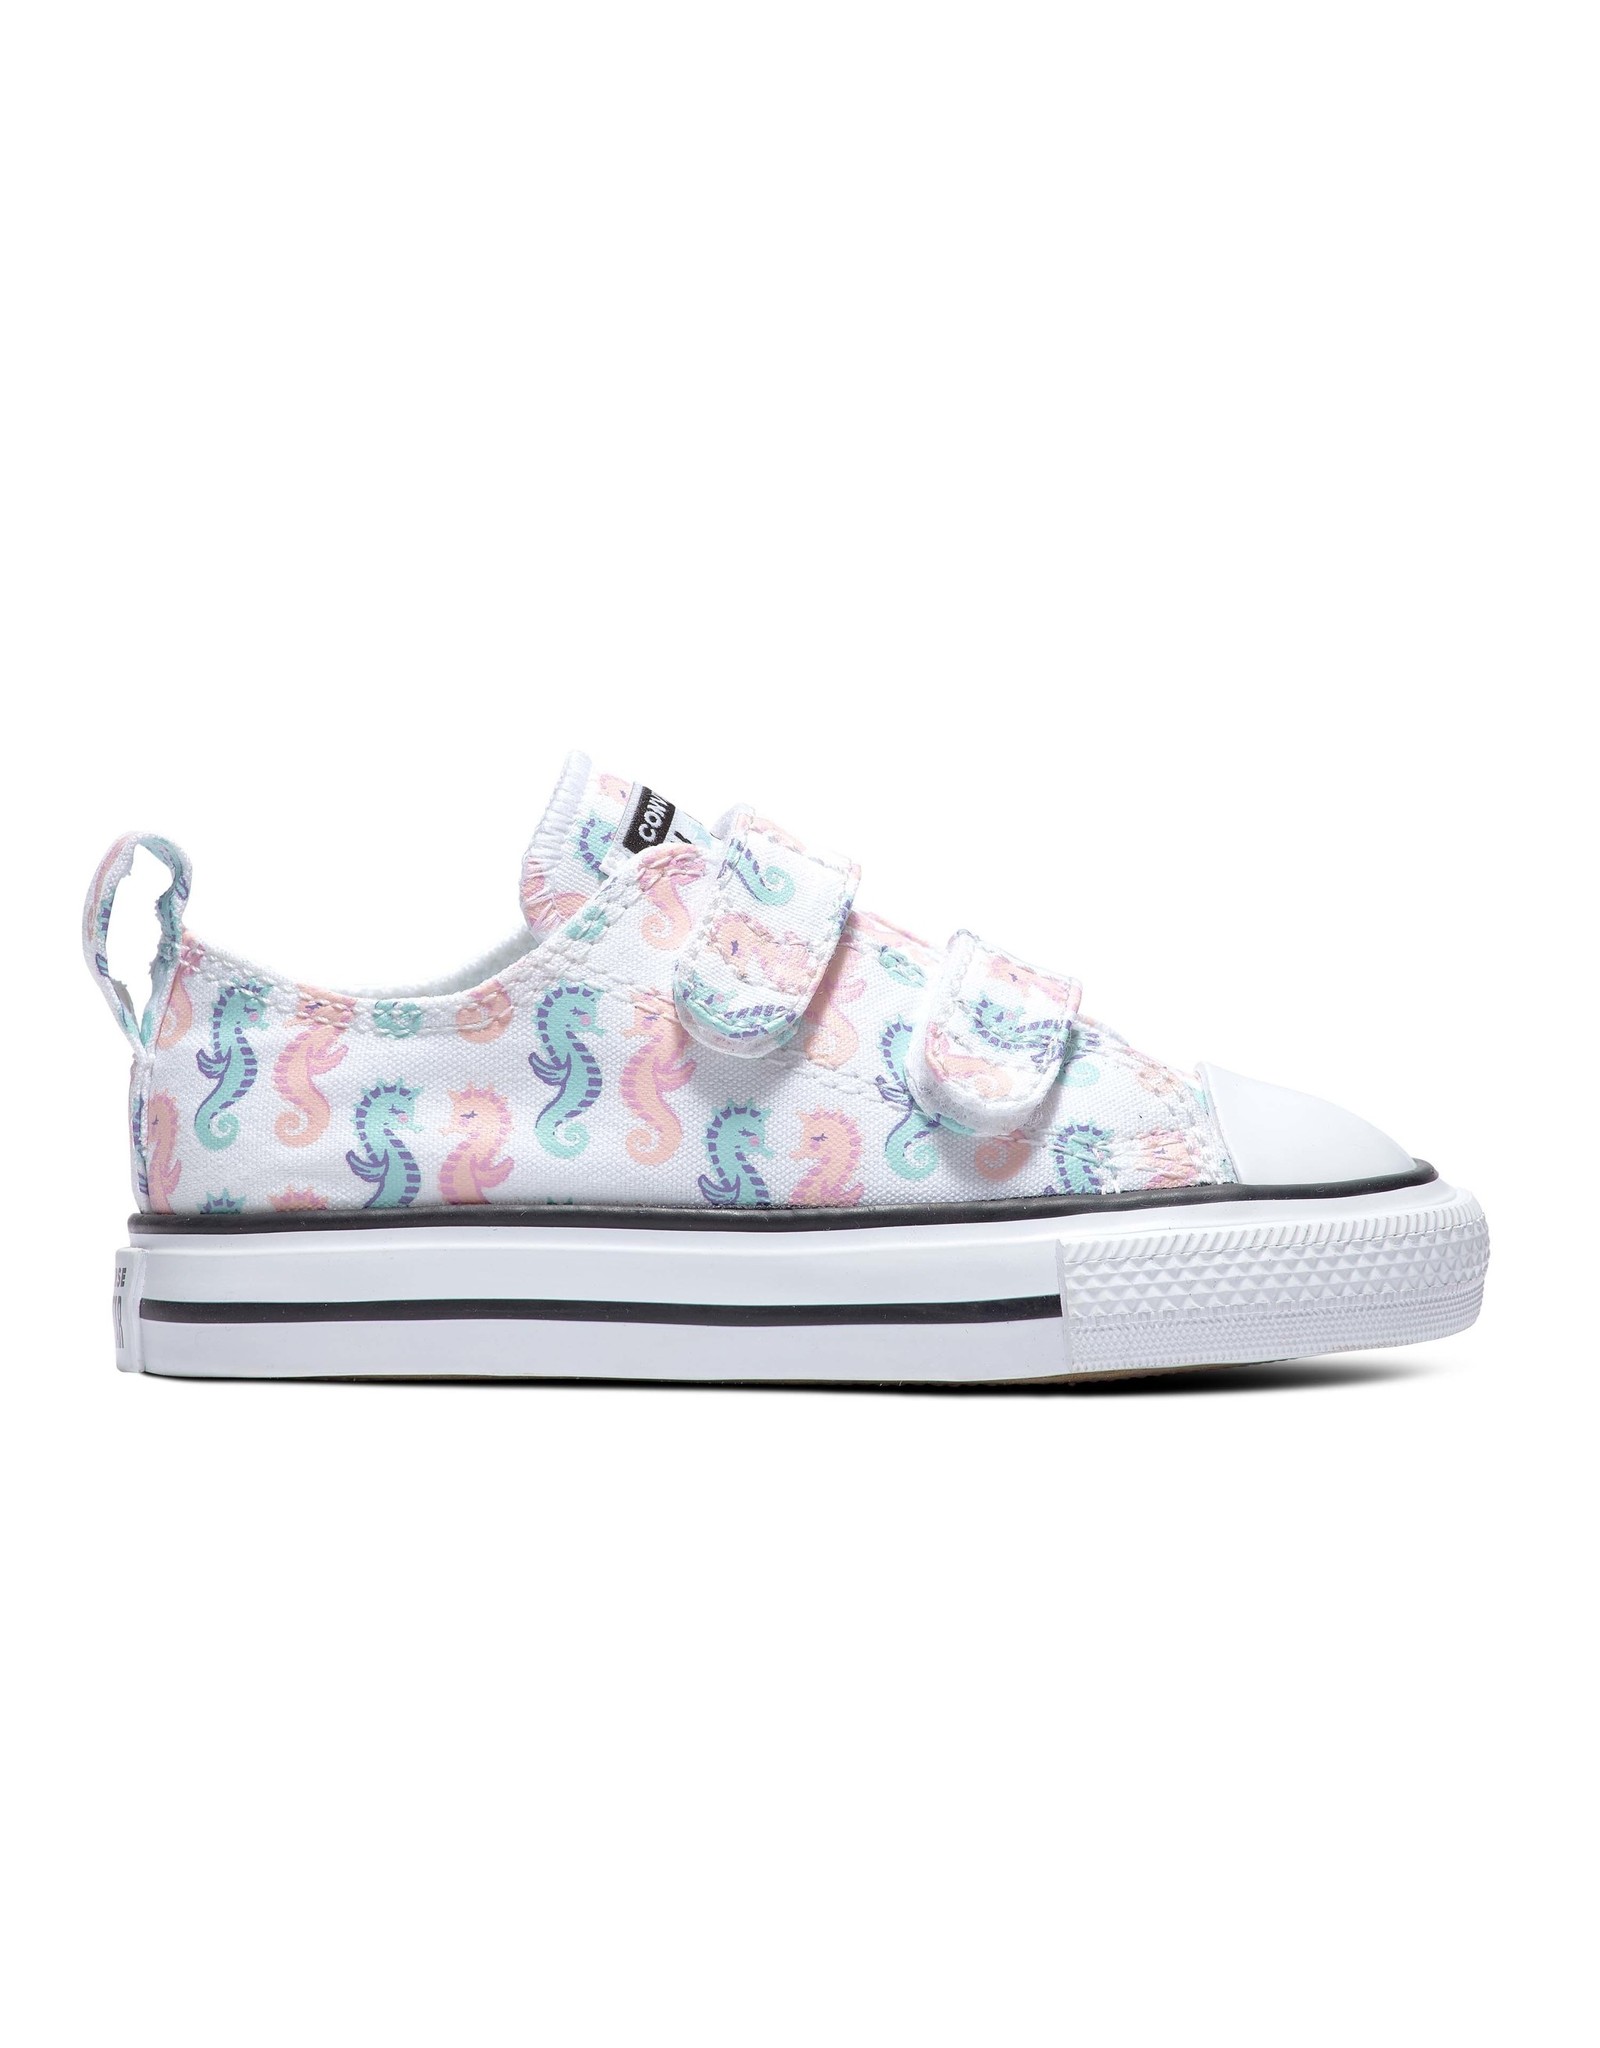 CONVERSE Chuck Taylor All Star 2V OX WHITE/STORM PINK/LIGHT DEW CNMER-772751C